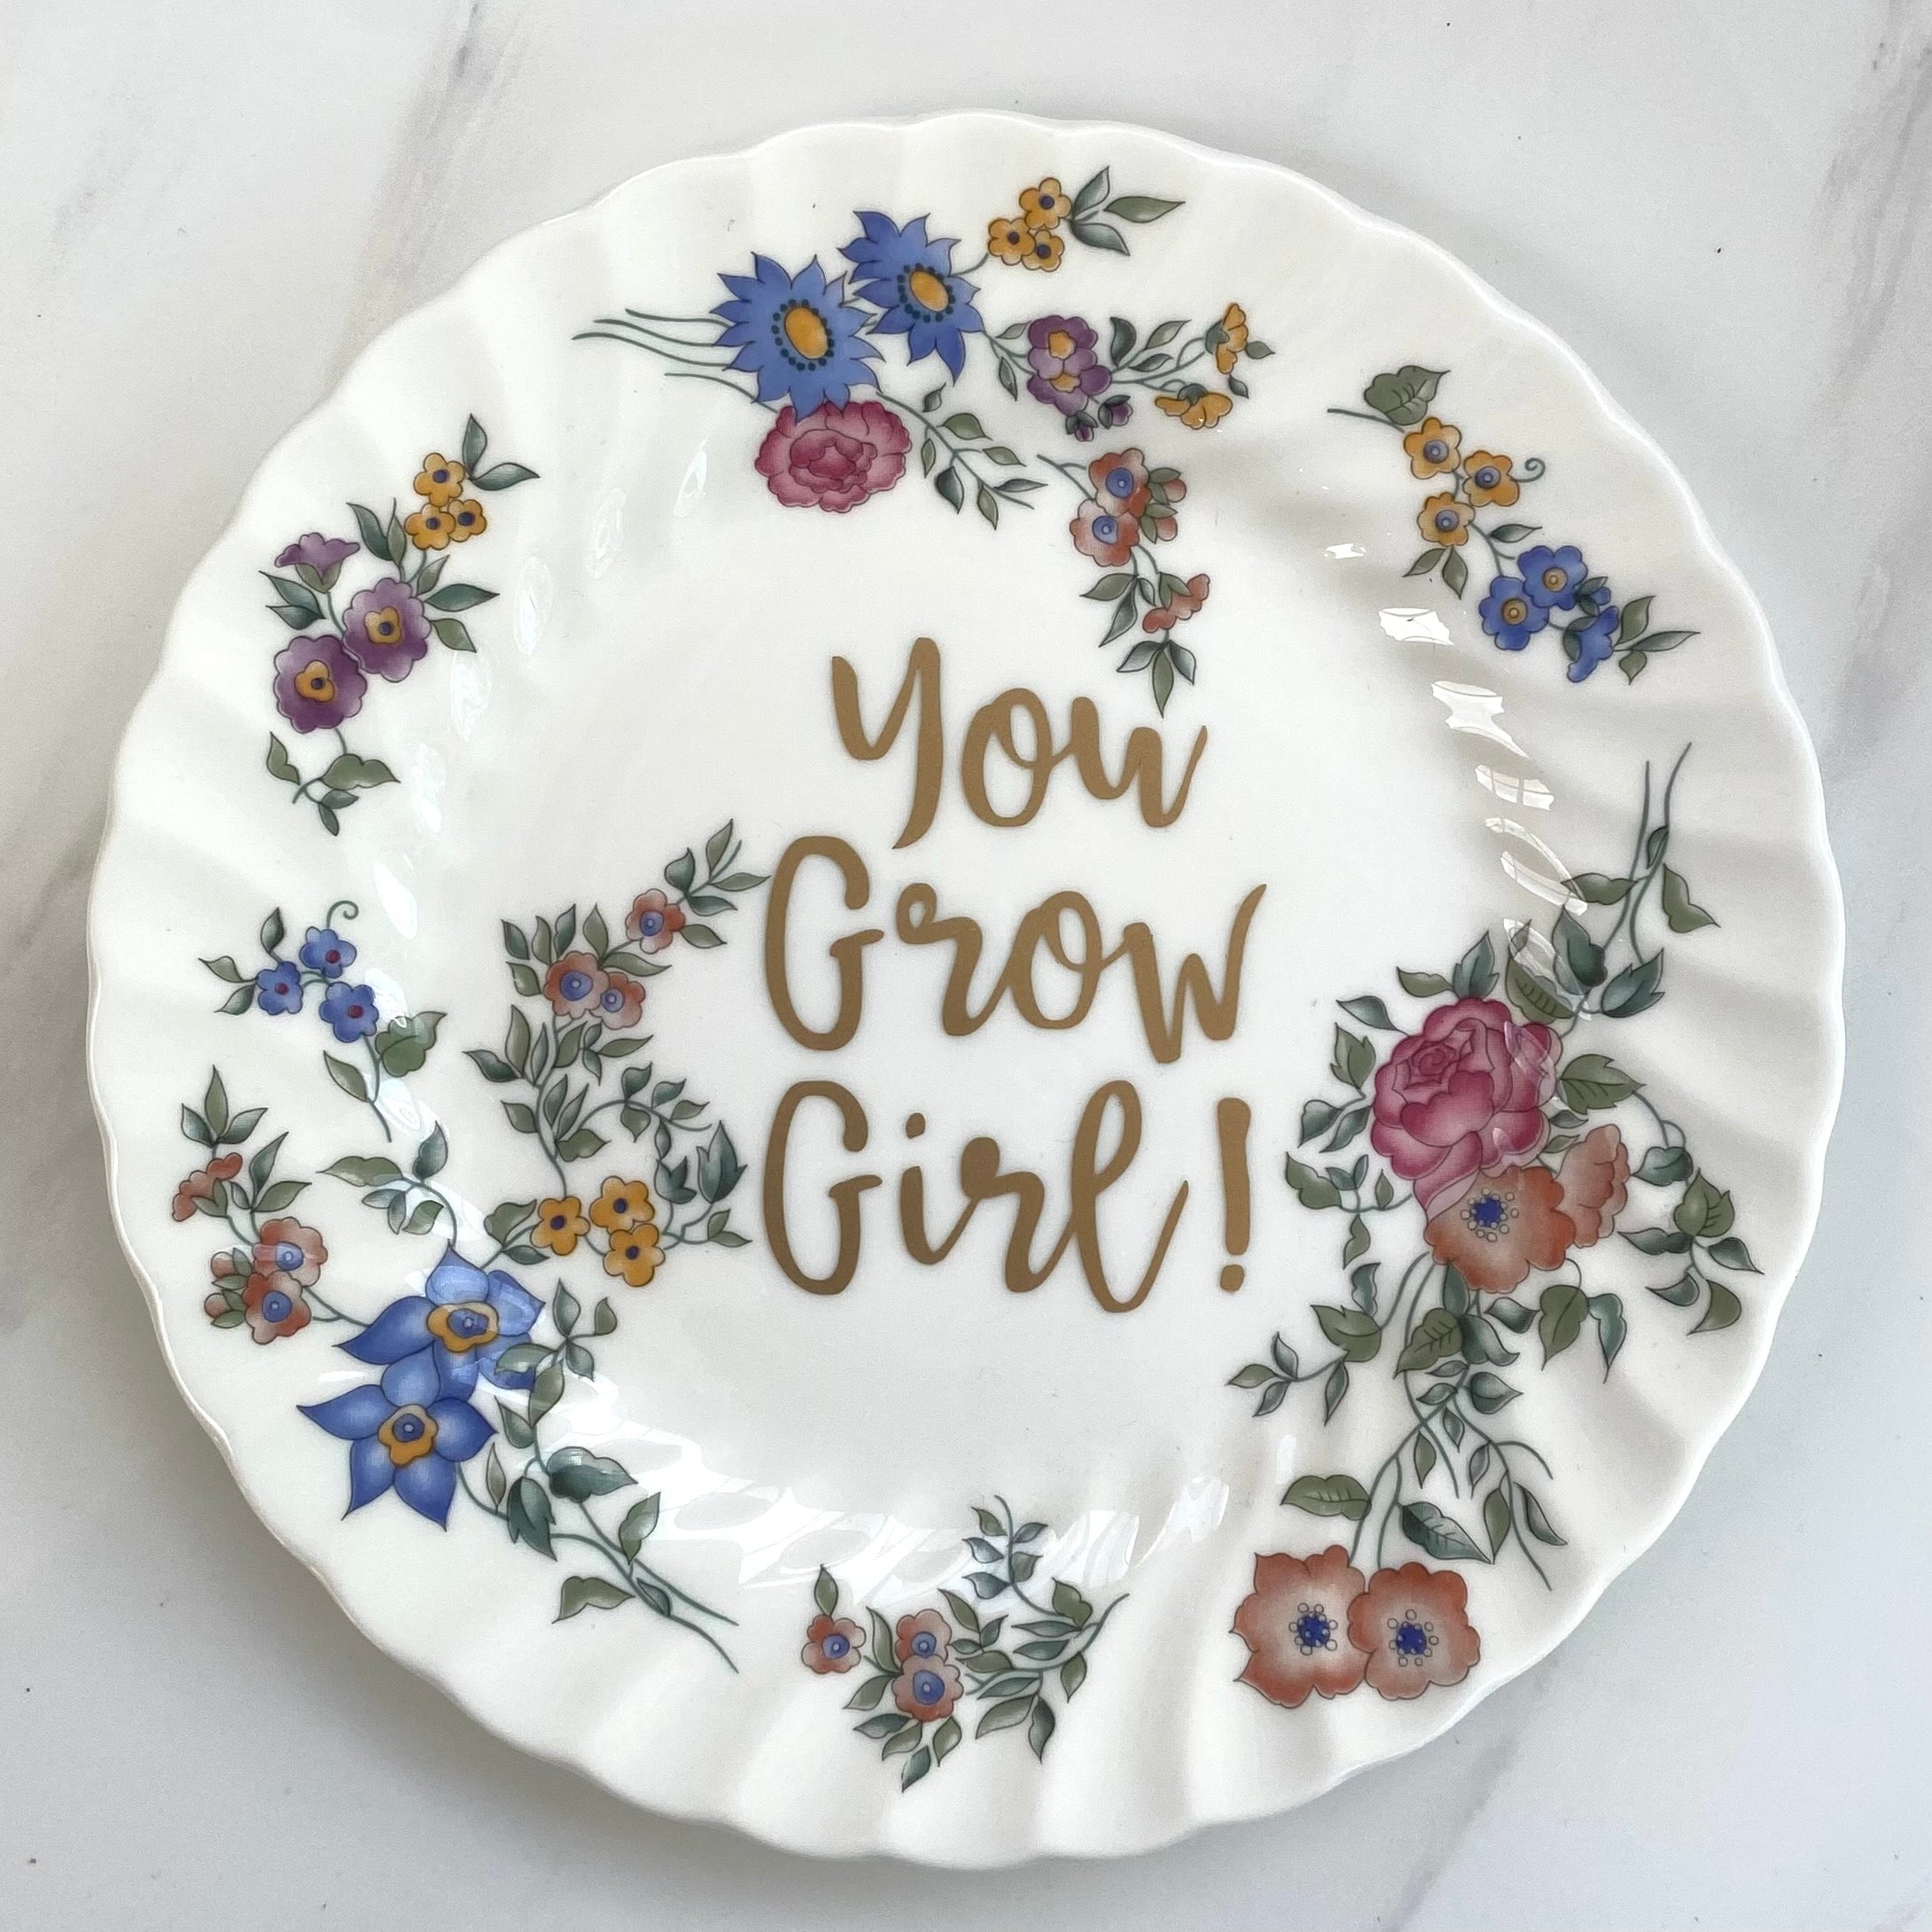 ‘You grow girl!’ quote on plate